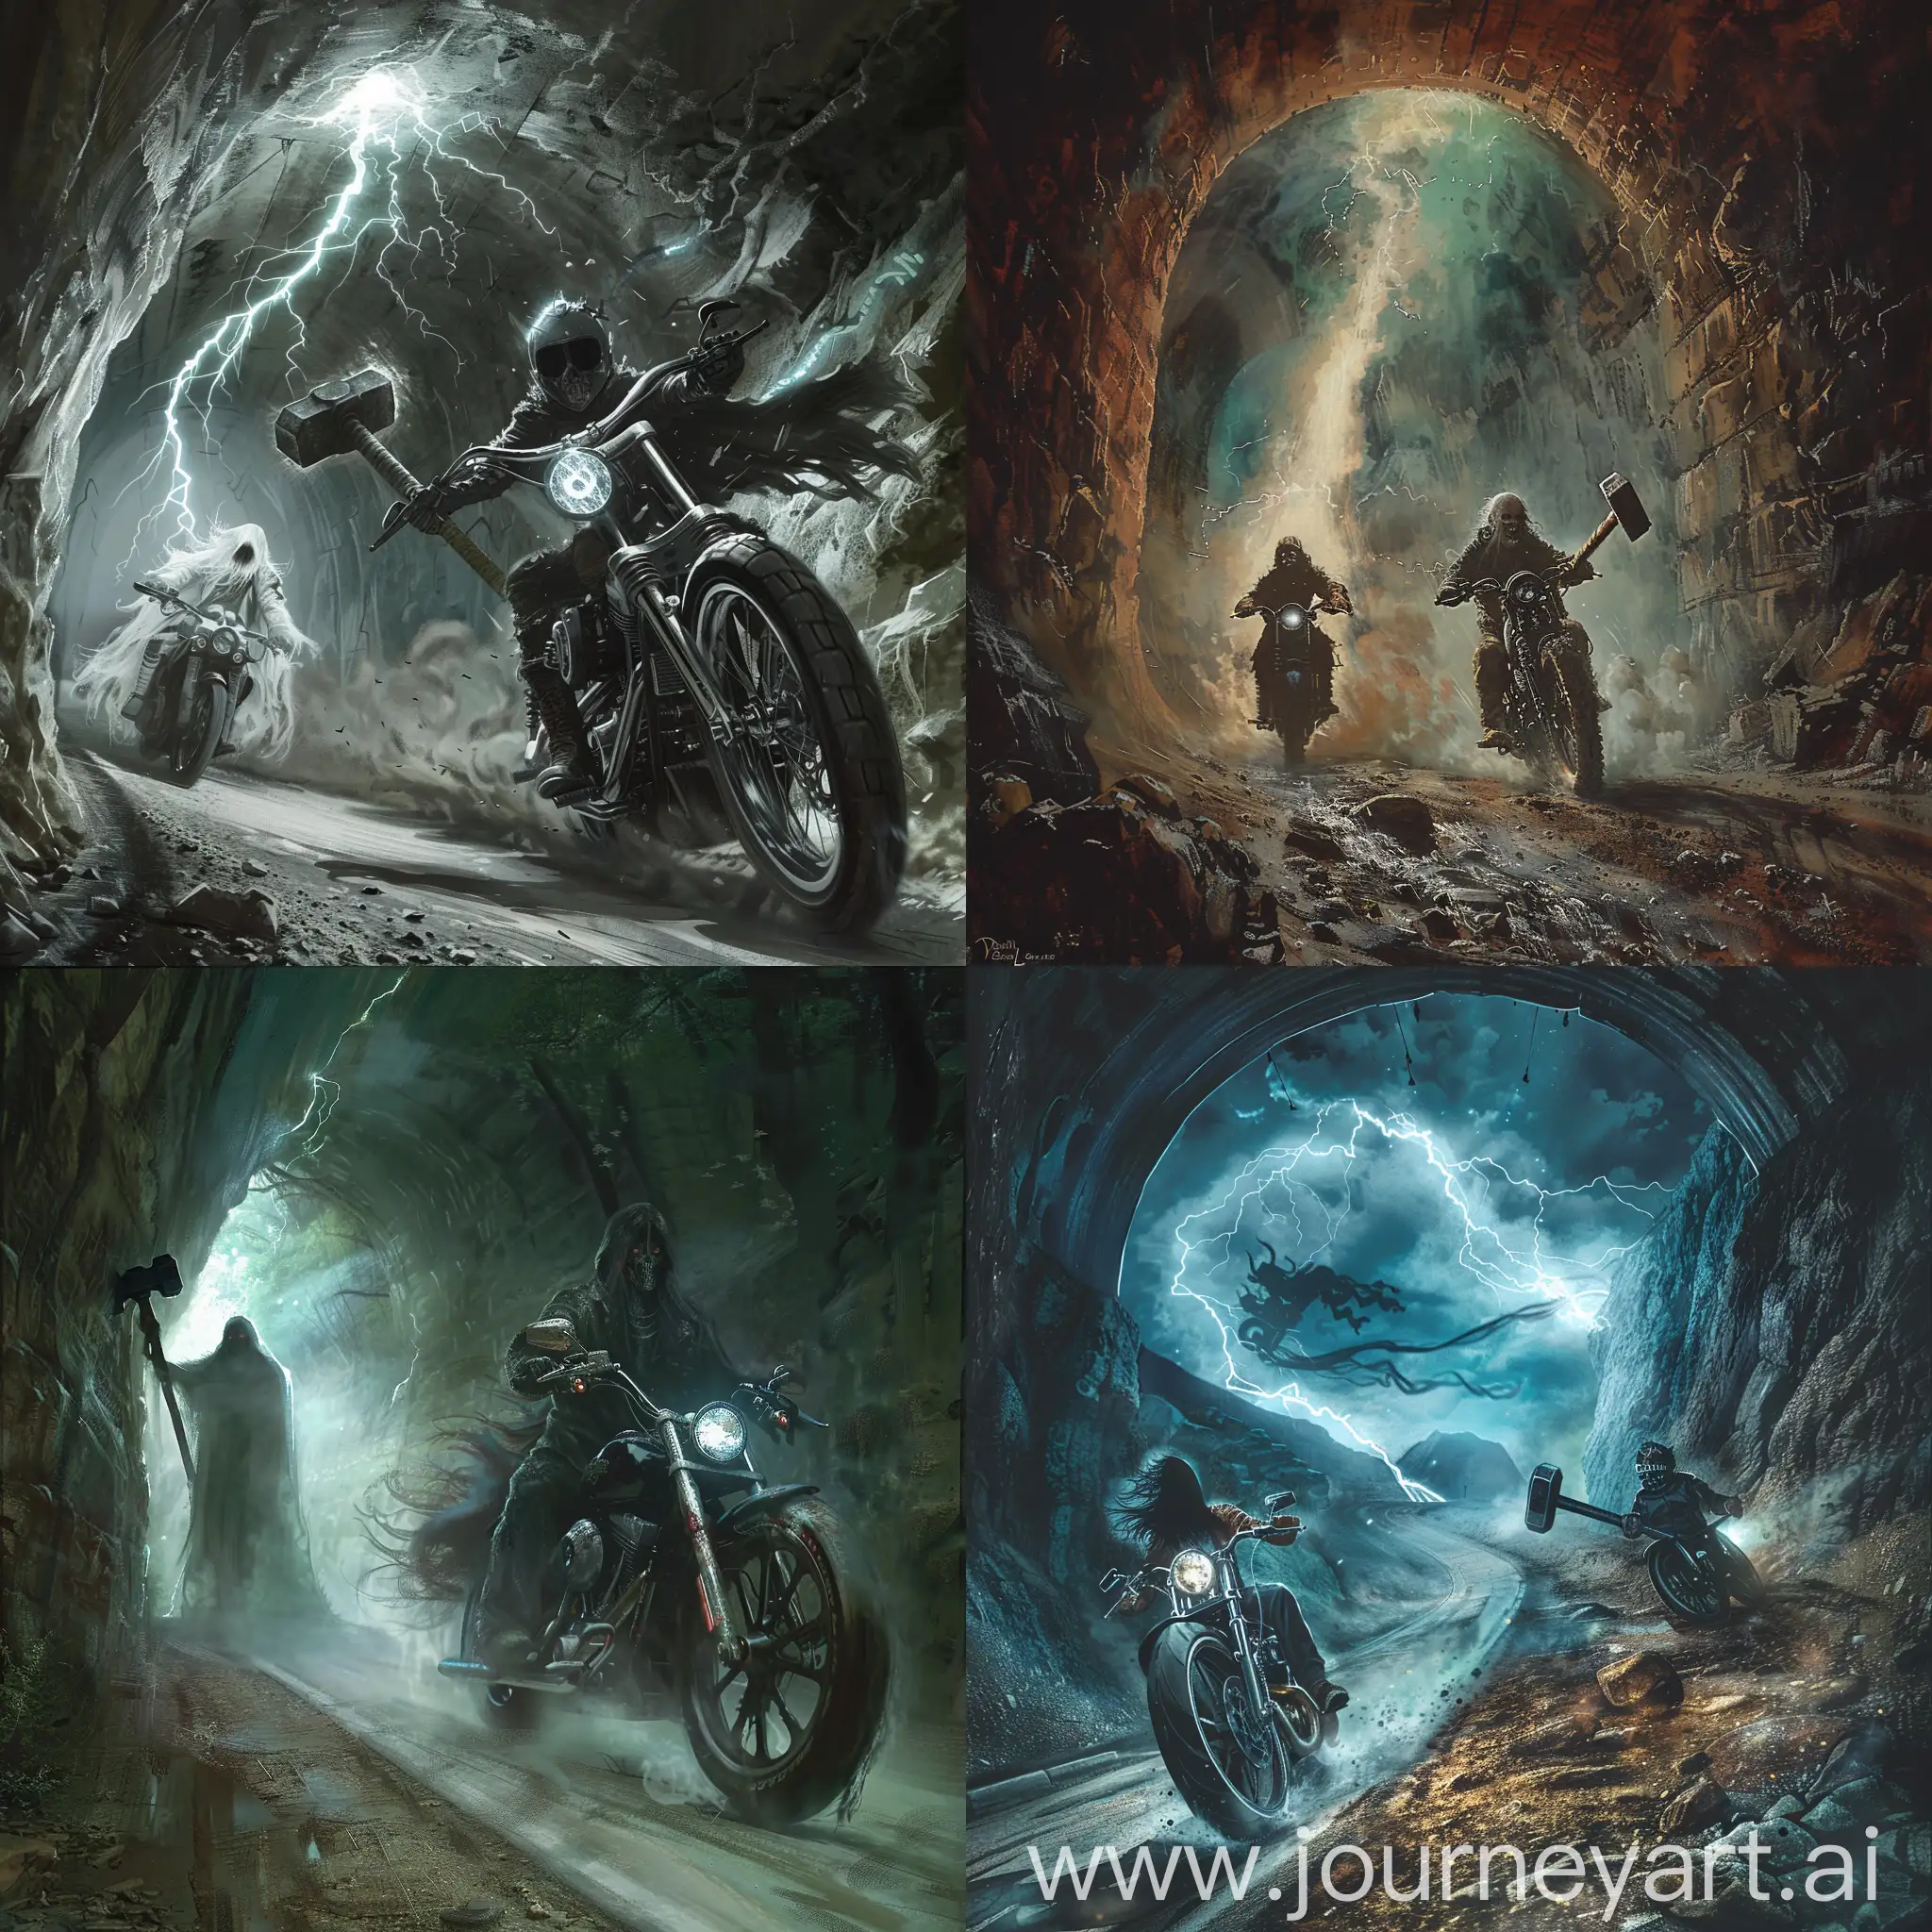 Is the ghostly biker a friend or foe? Are they chasing the Devil's Rider or trying to help them?What lies beyond the tunnel's exit? A glimmer of hope or a new, even greater danger?Does the Devil's Rider wield the hammer for good or for personal gain